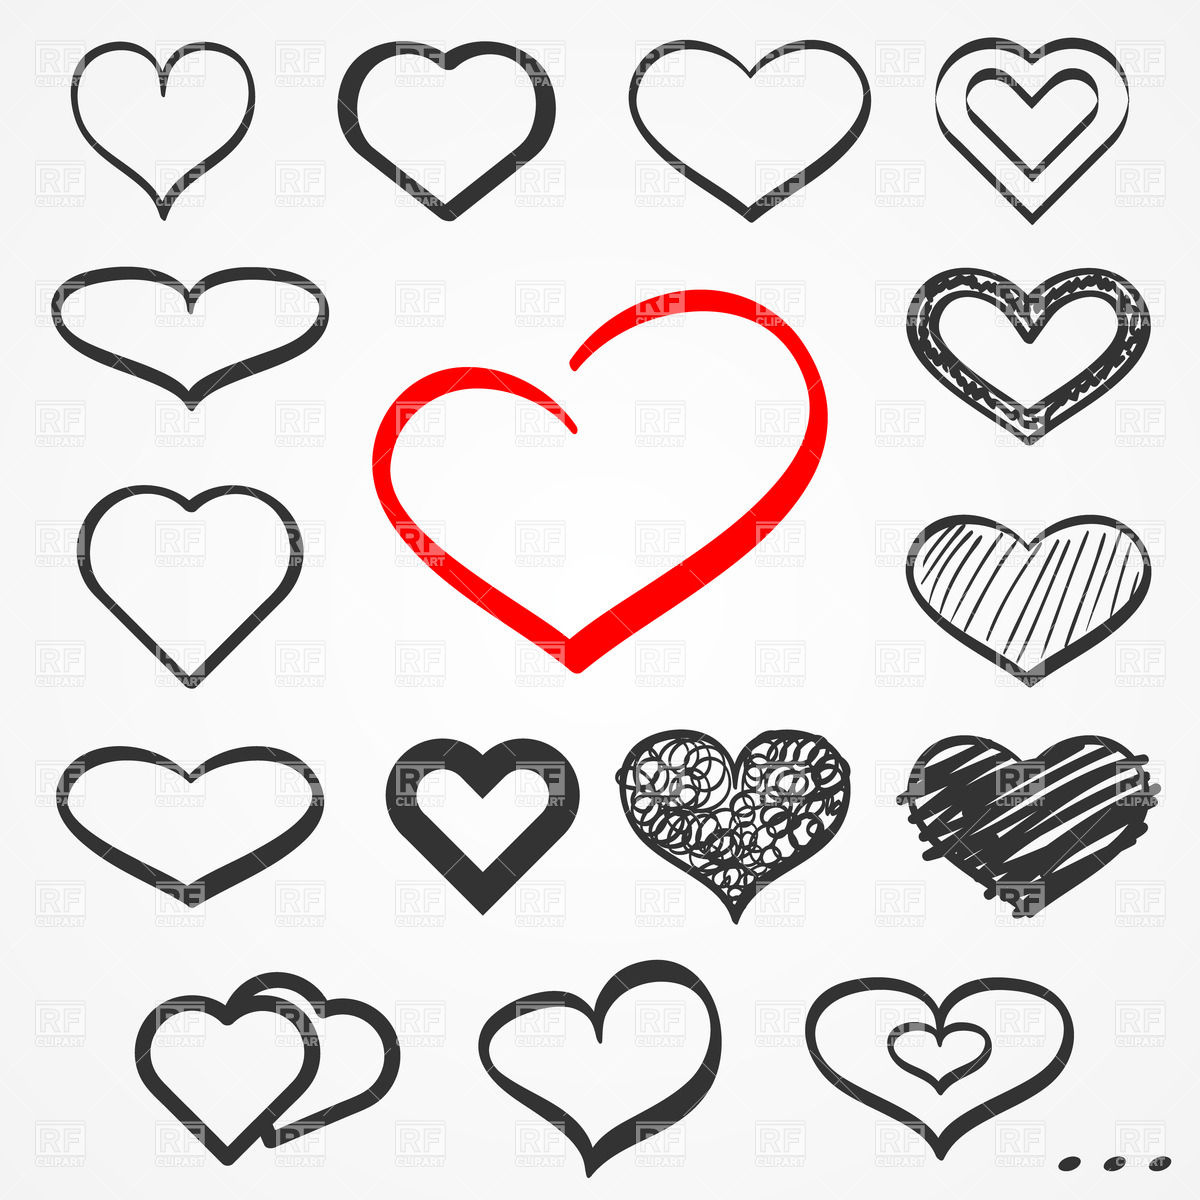 free heart hands clipart - photo #31